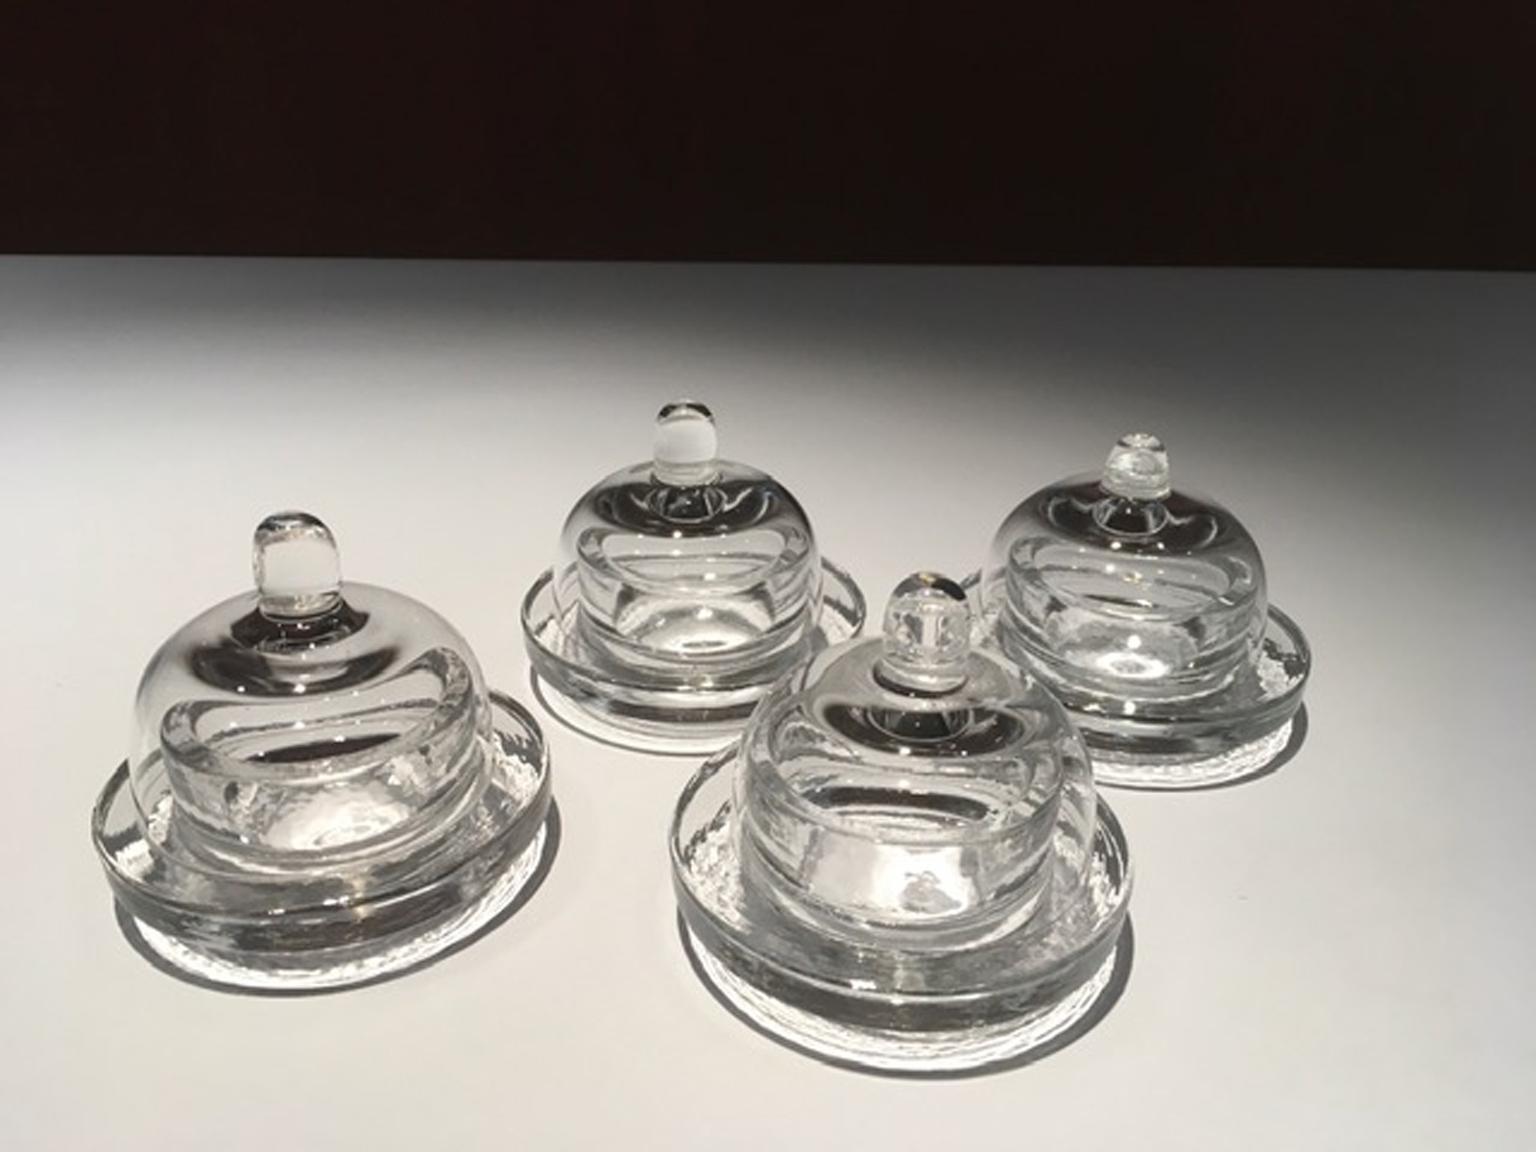 This is a glass butter dish set to be used to complete the table setting for an elegant dinner.
 